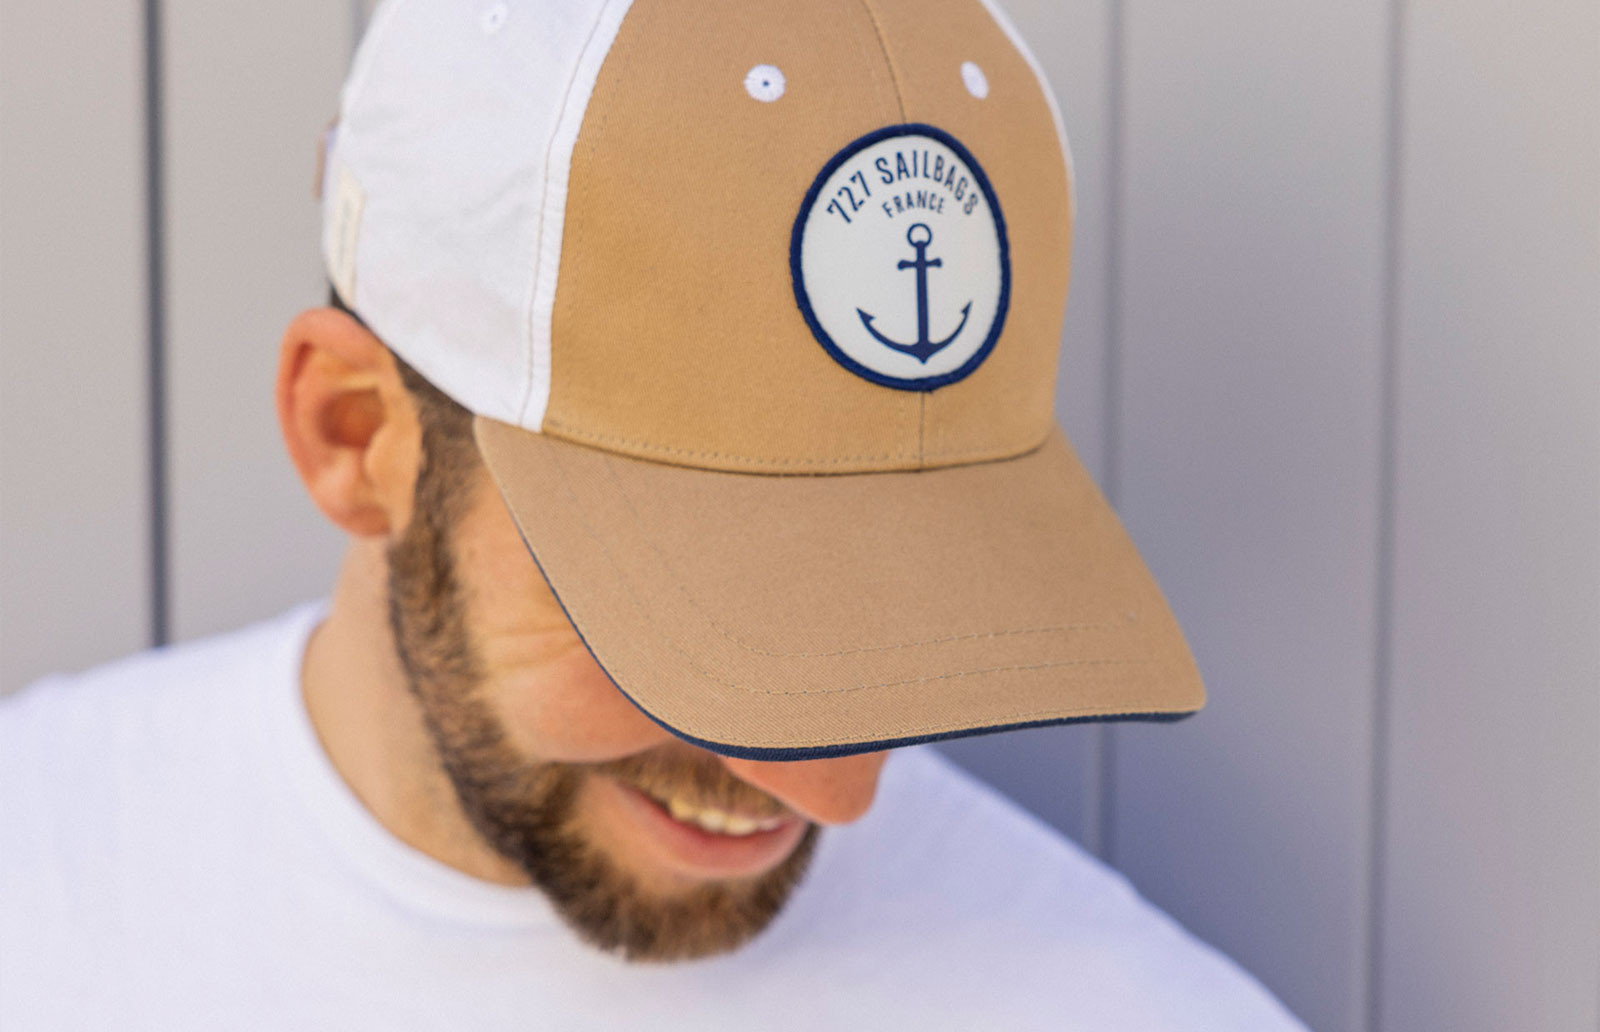 100% recycled sailcloth caps